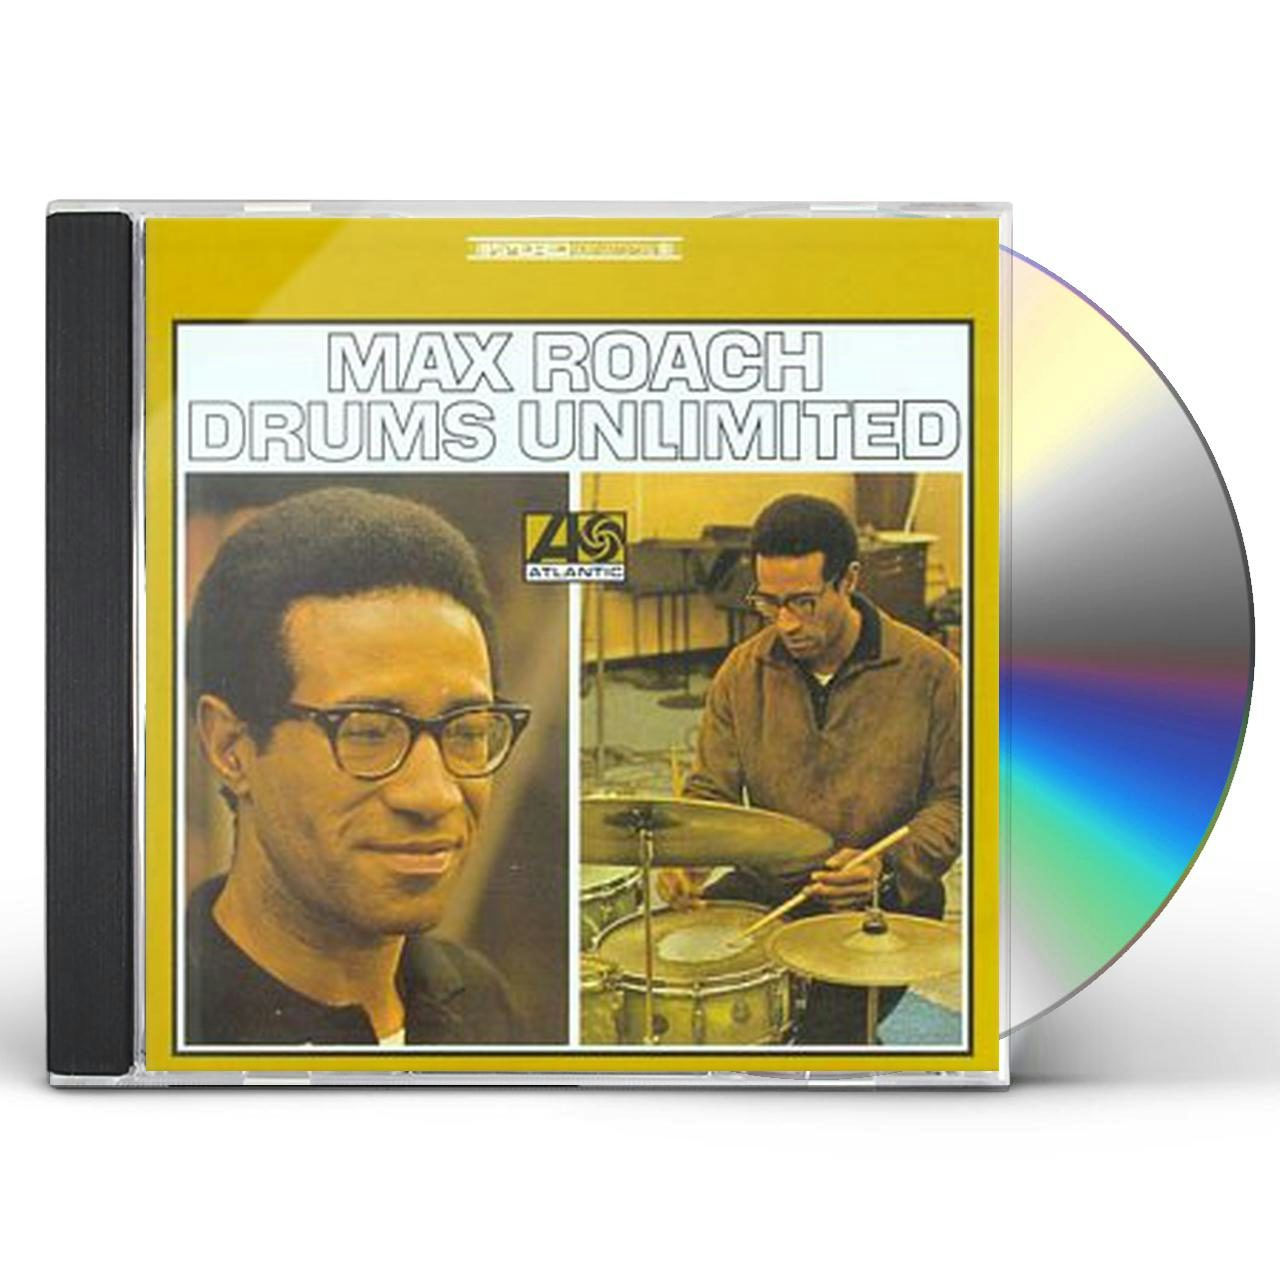 Max Roach DRUMS UNLIMITED CD